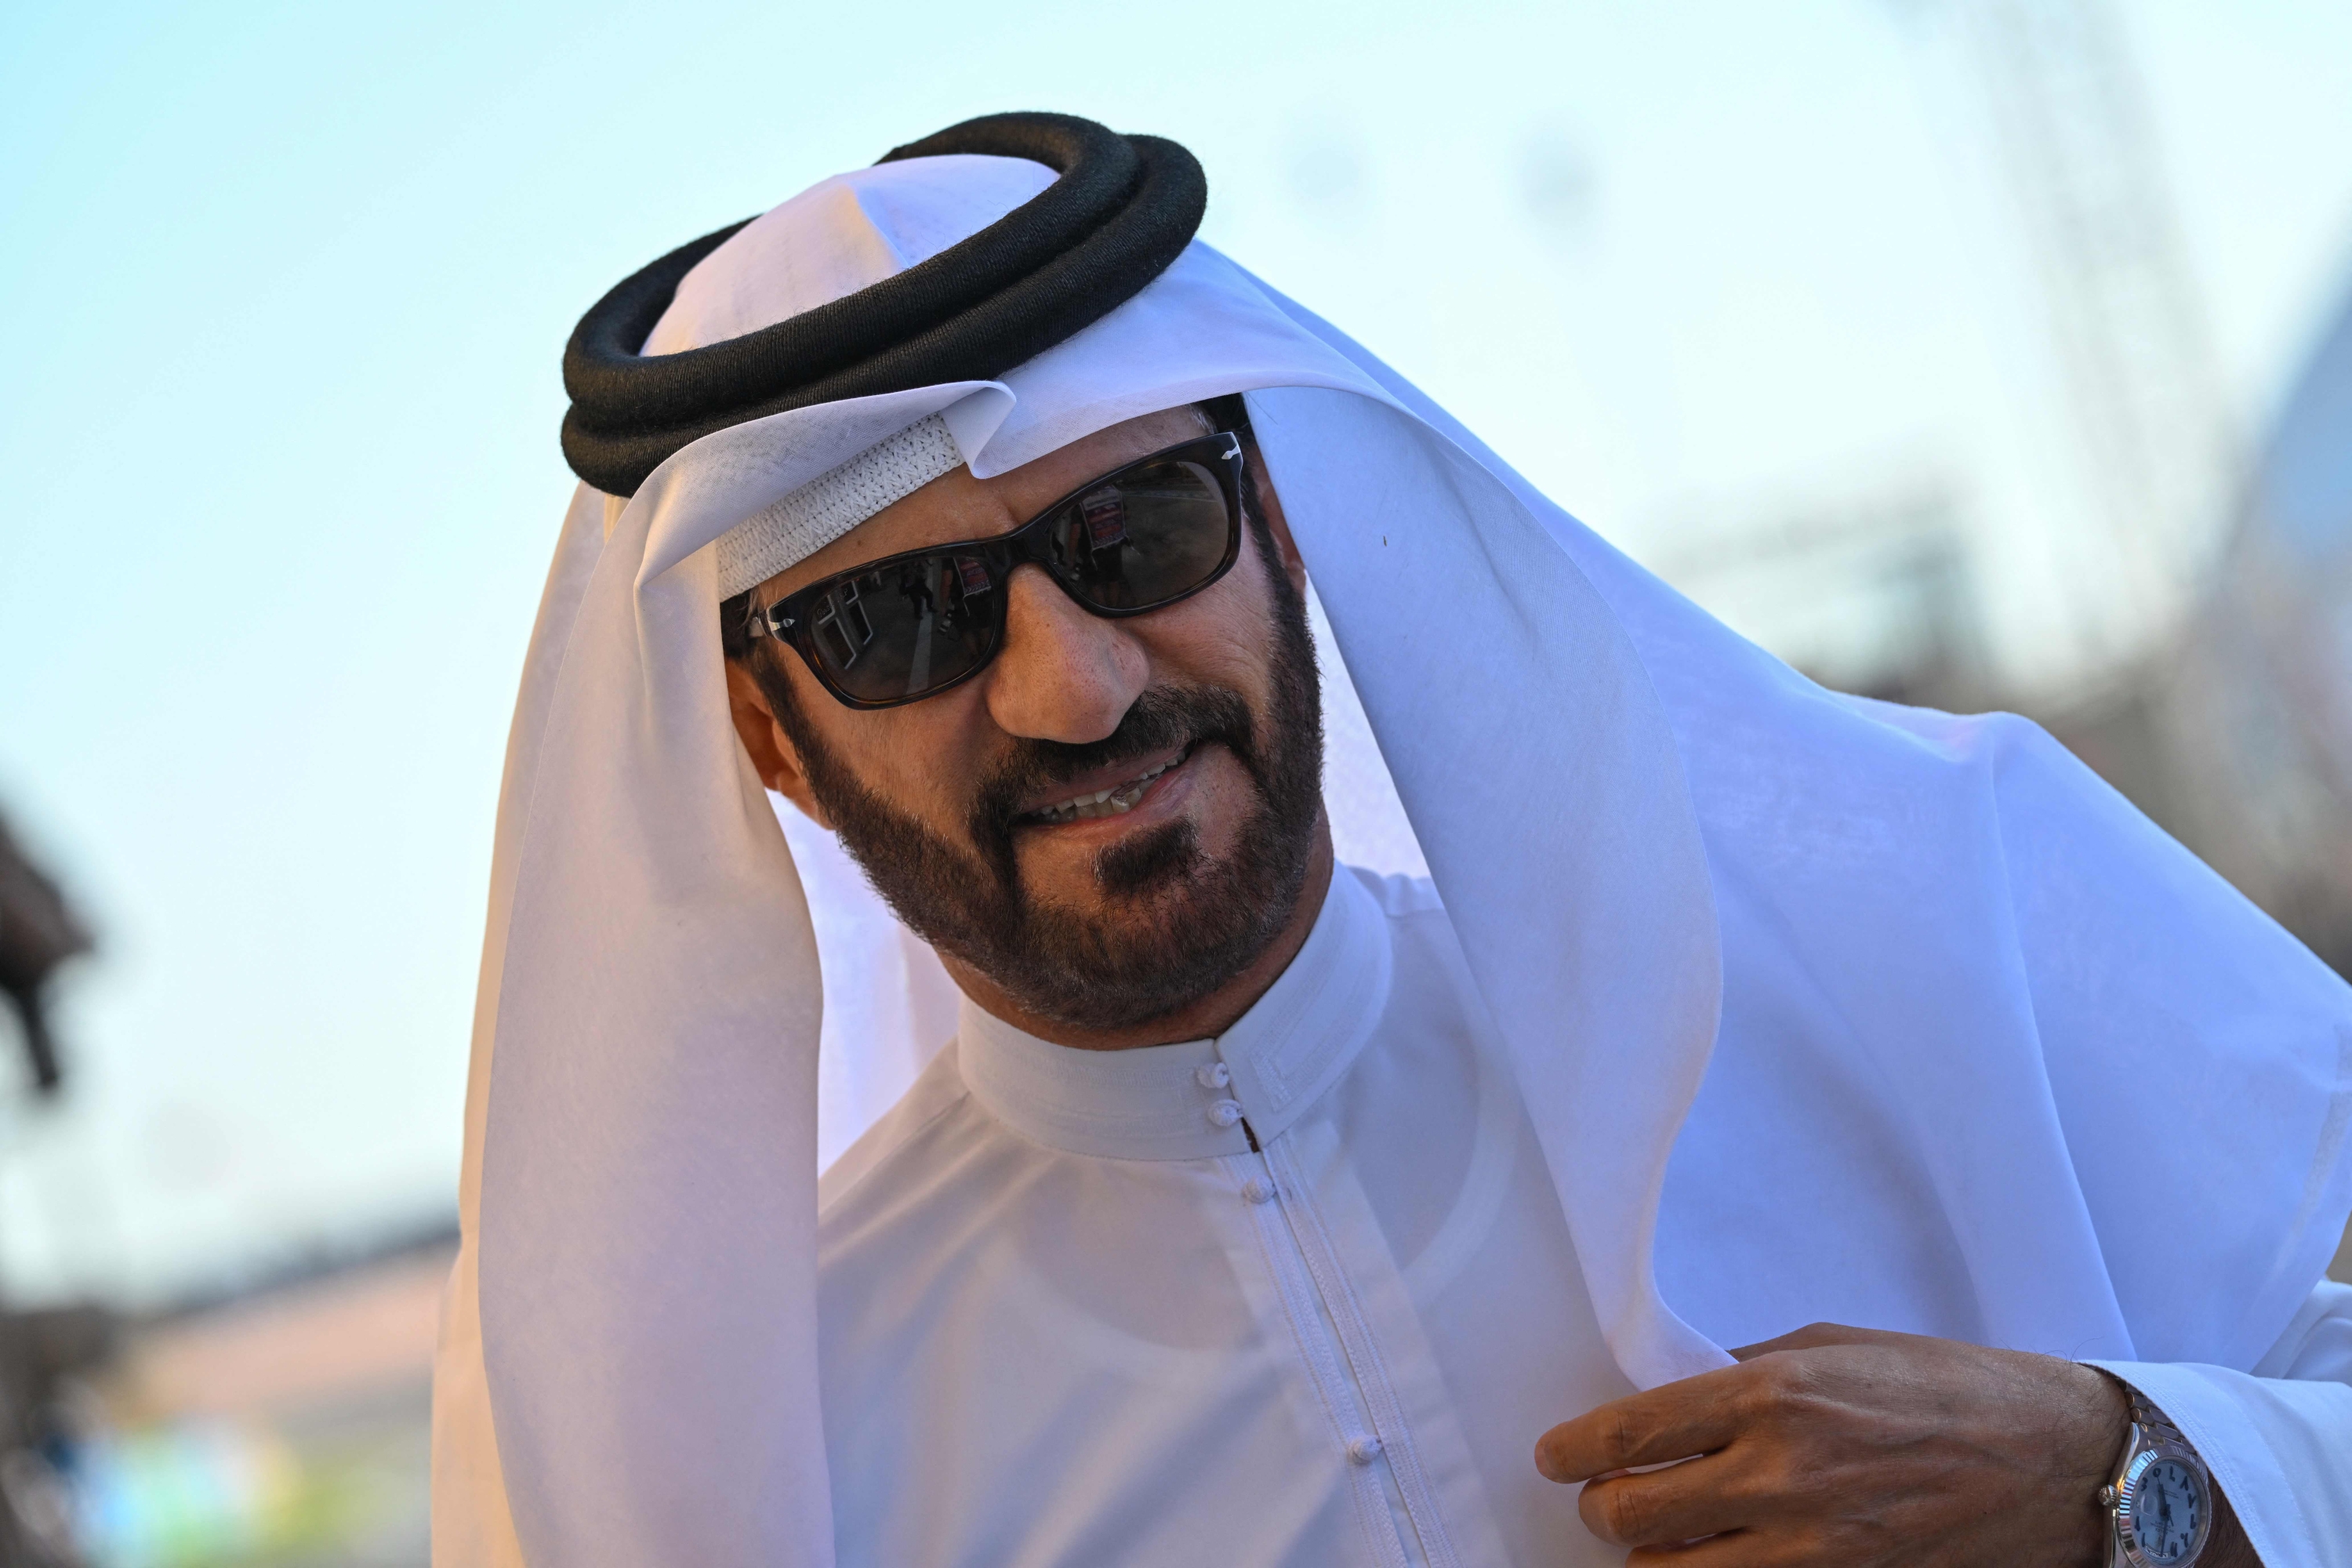 FIA president Mohammed bin Sulayem attends the third practice session of the Bahrain Formula One Grand Prix at the Bahrain International Circuit in Sakhir on March 1, 2024. (Photo by ANDREJ ISAKOVIC / AFP)